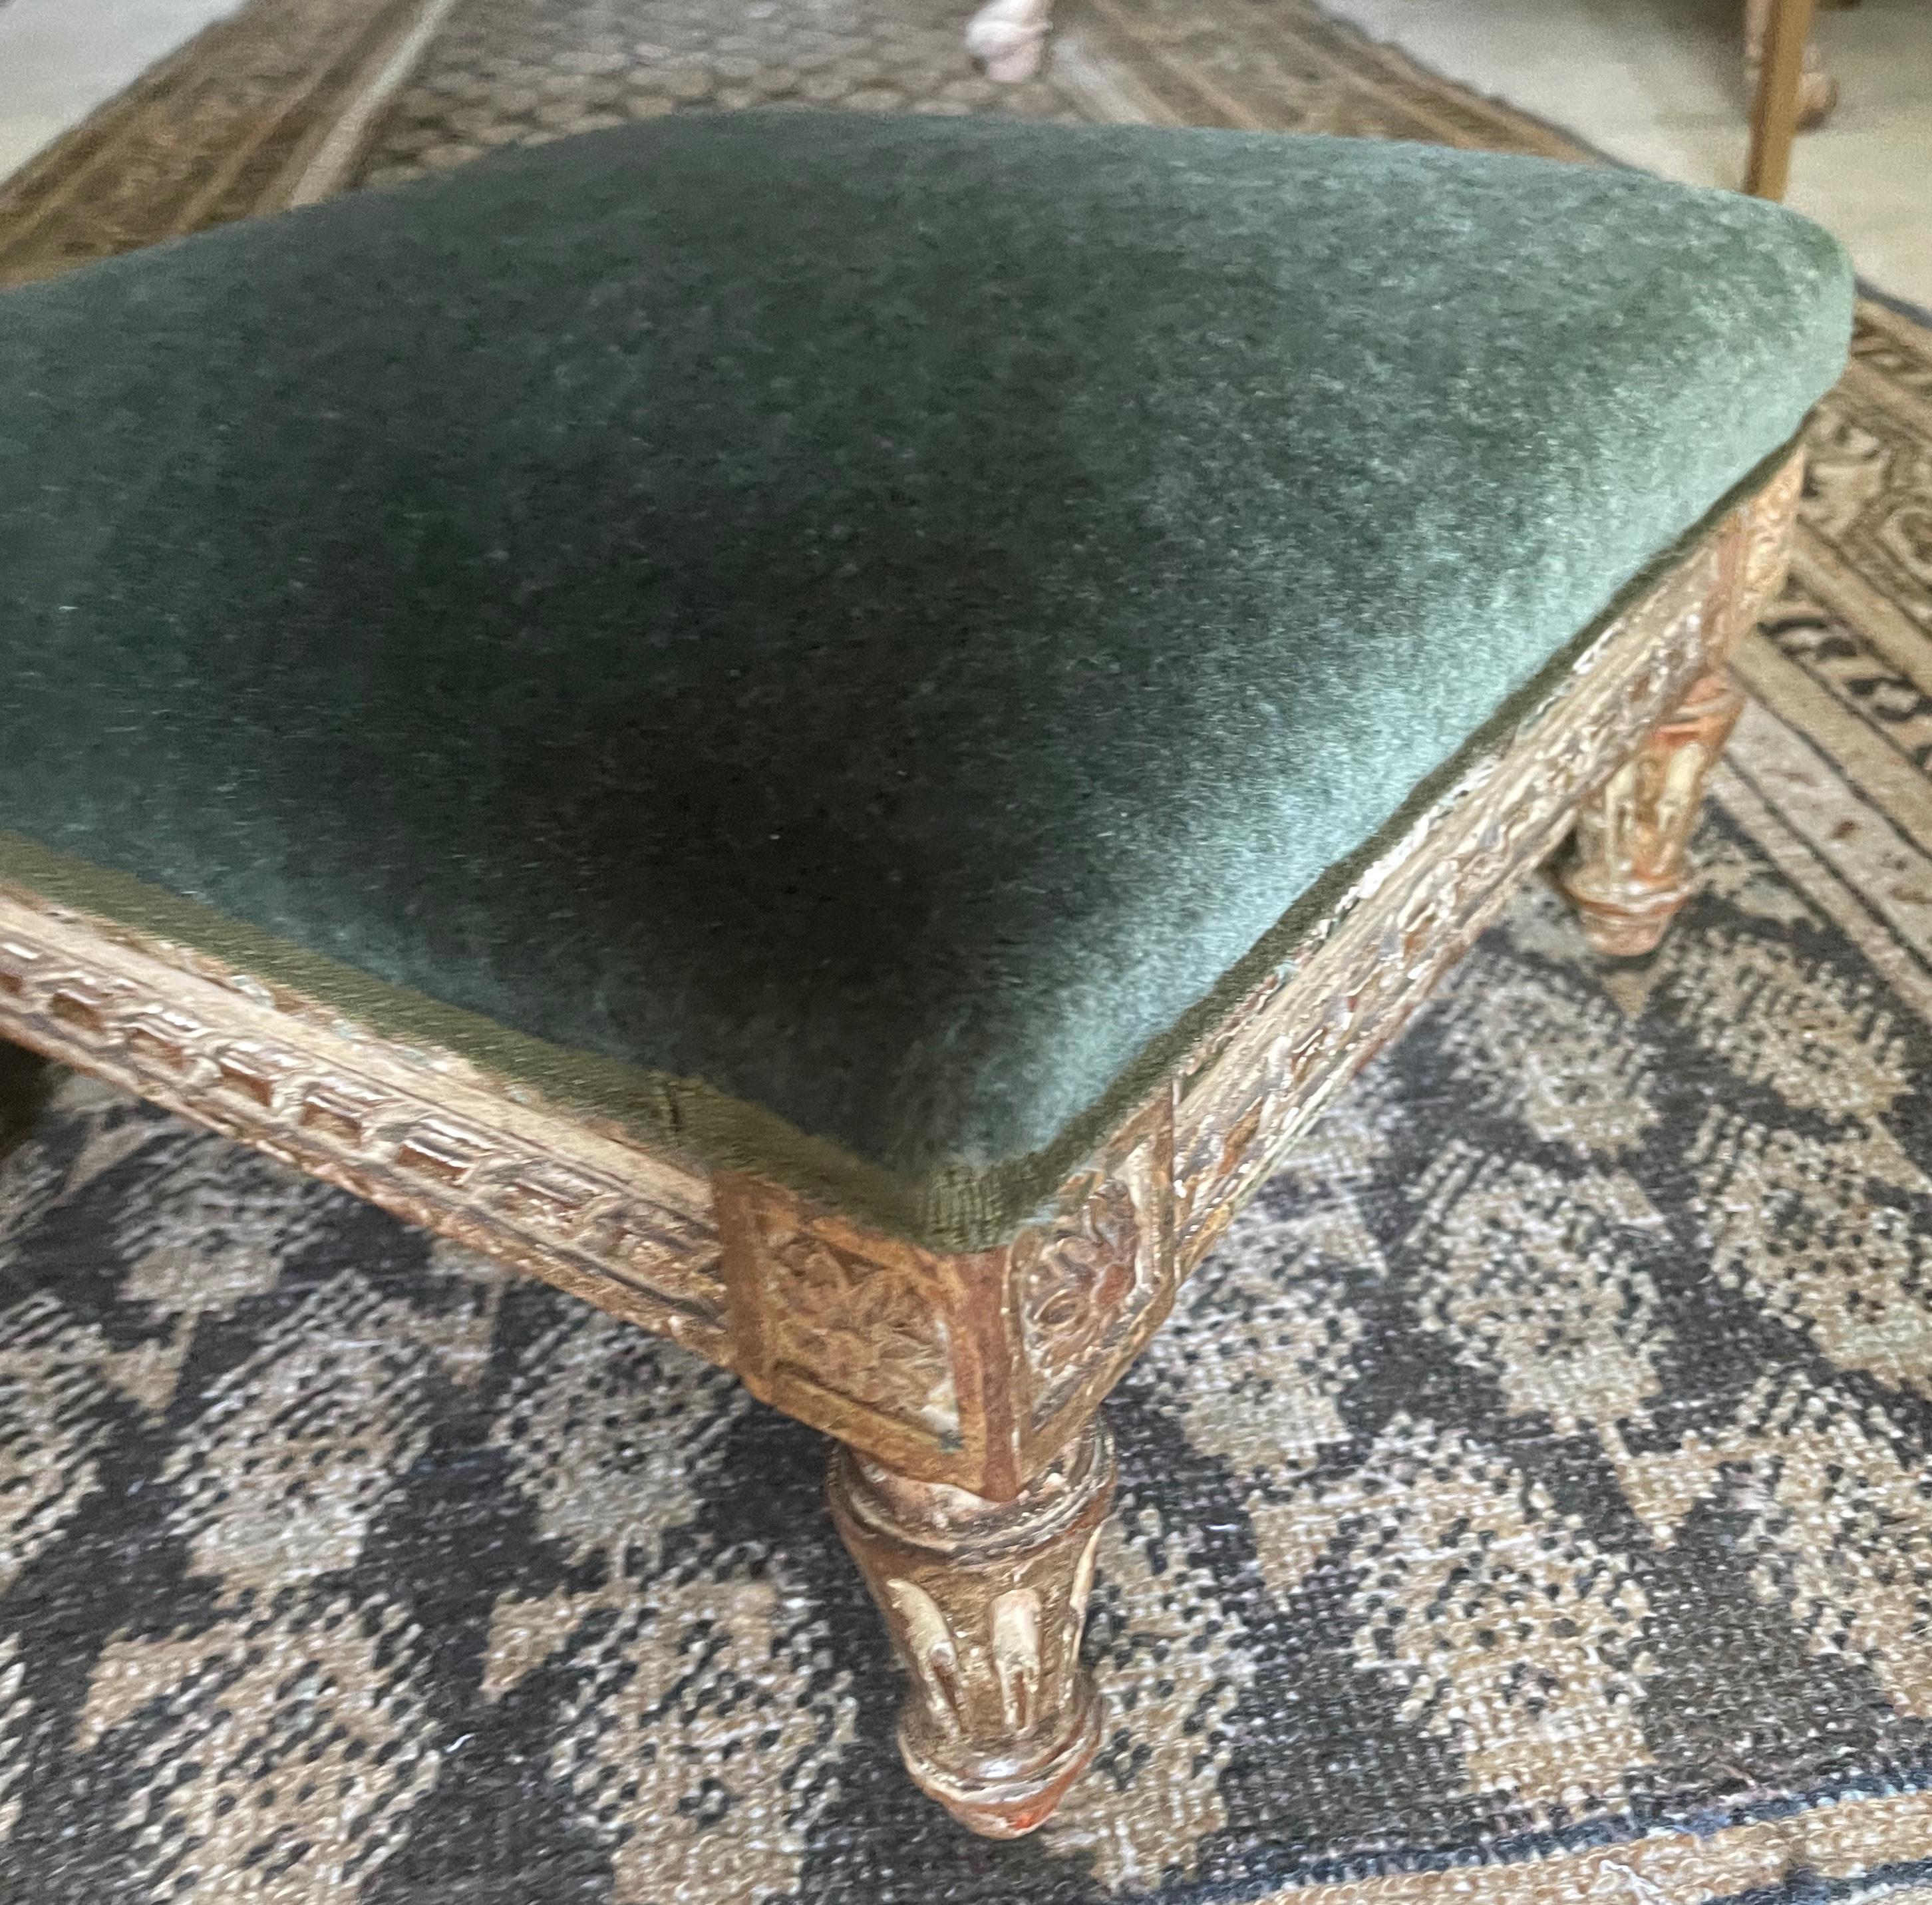 Louis XVI green mohair footstool.  Antique French faded painted and gilt carved stool newly reupholstered in bottle green mohair. France late 18th early 19th century
Dimension: 14